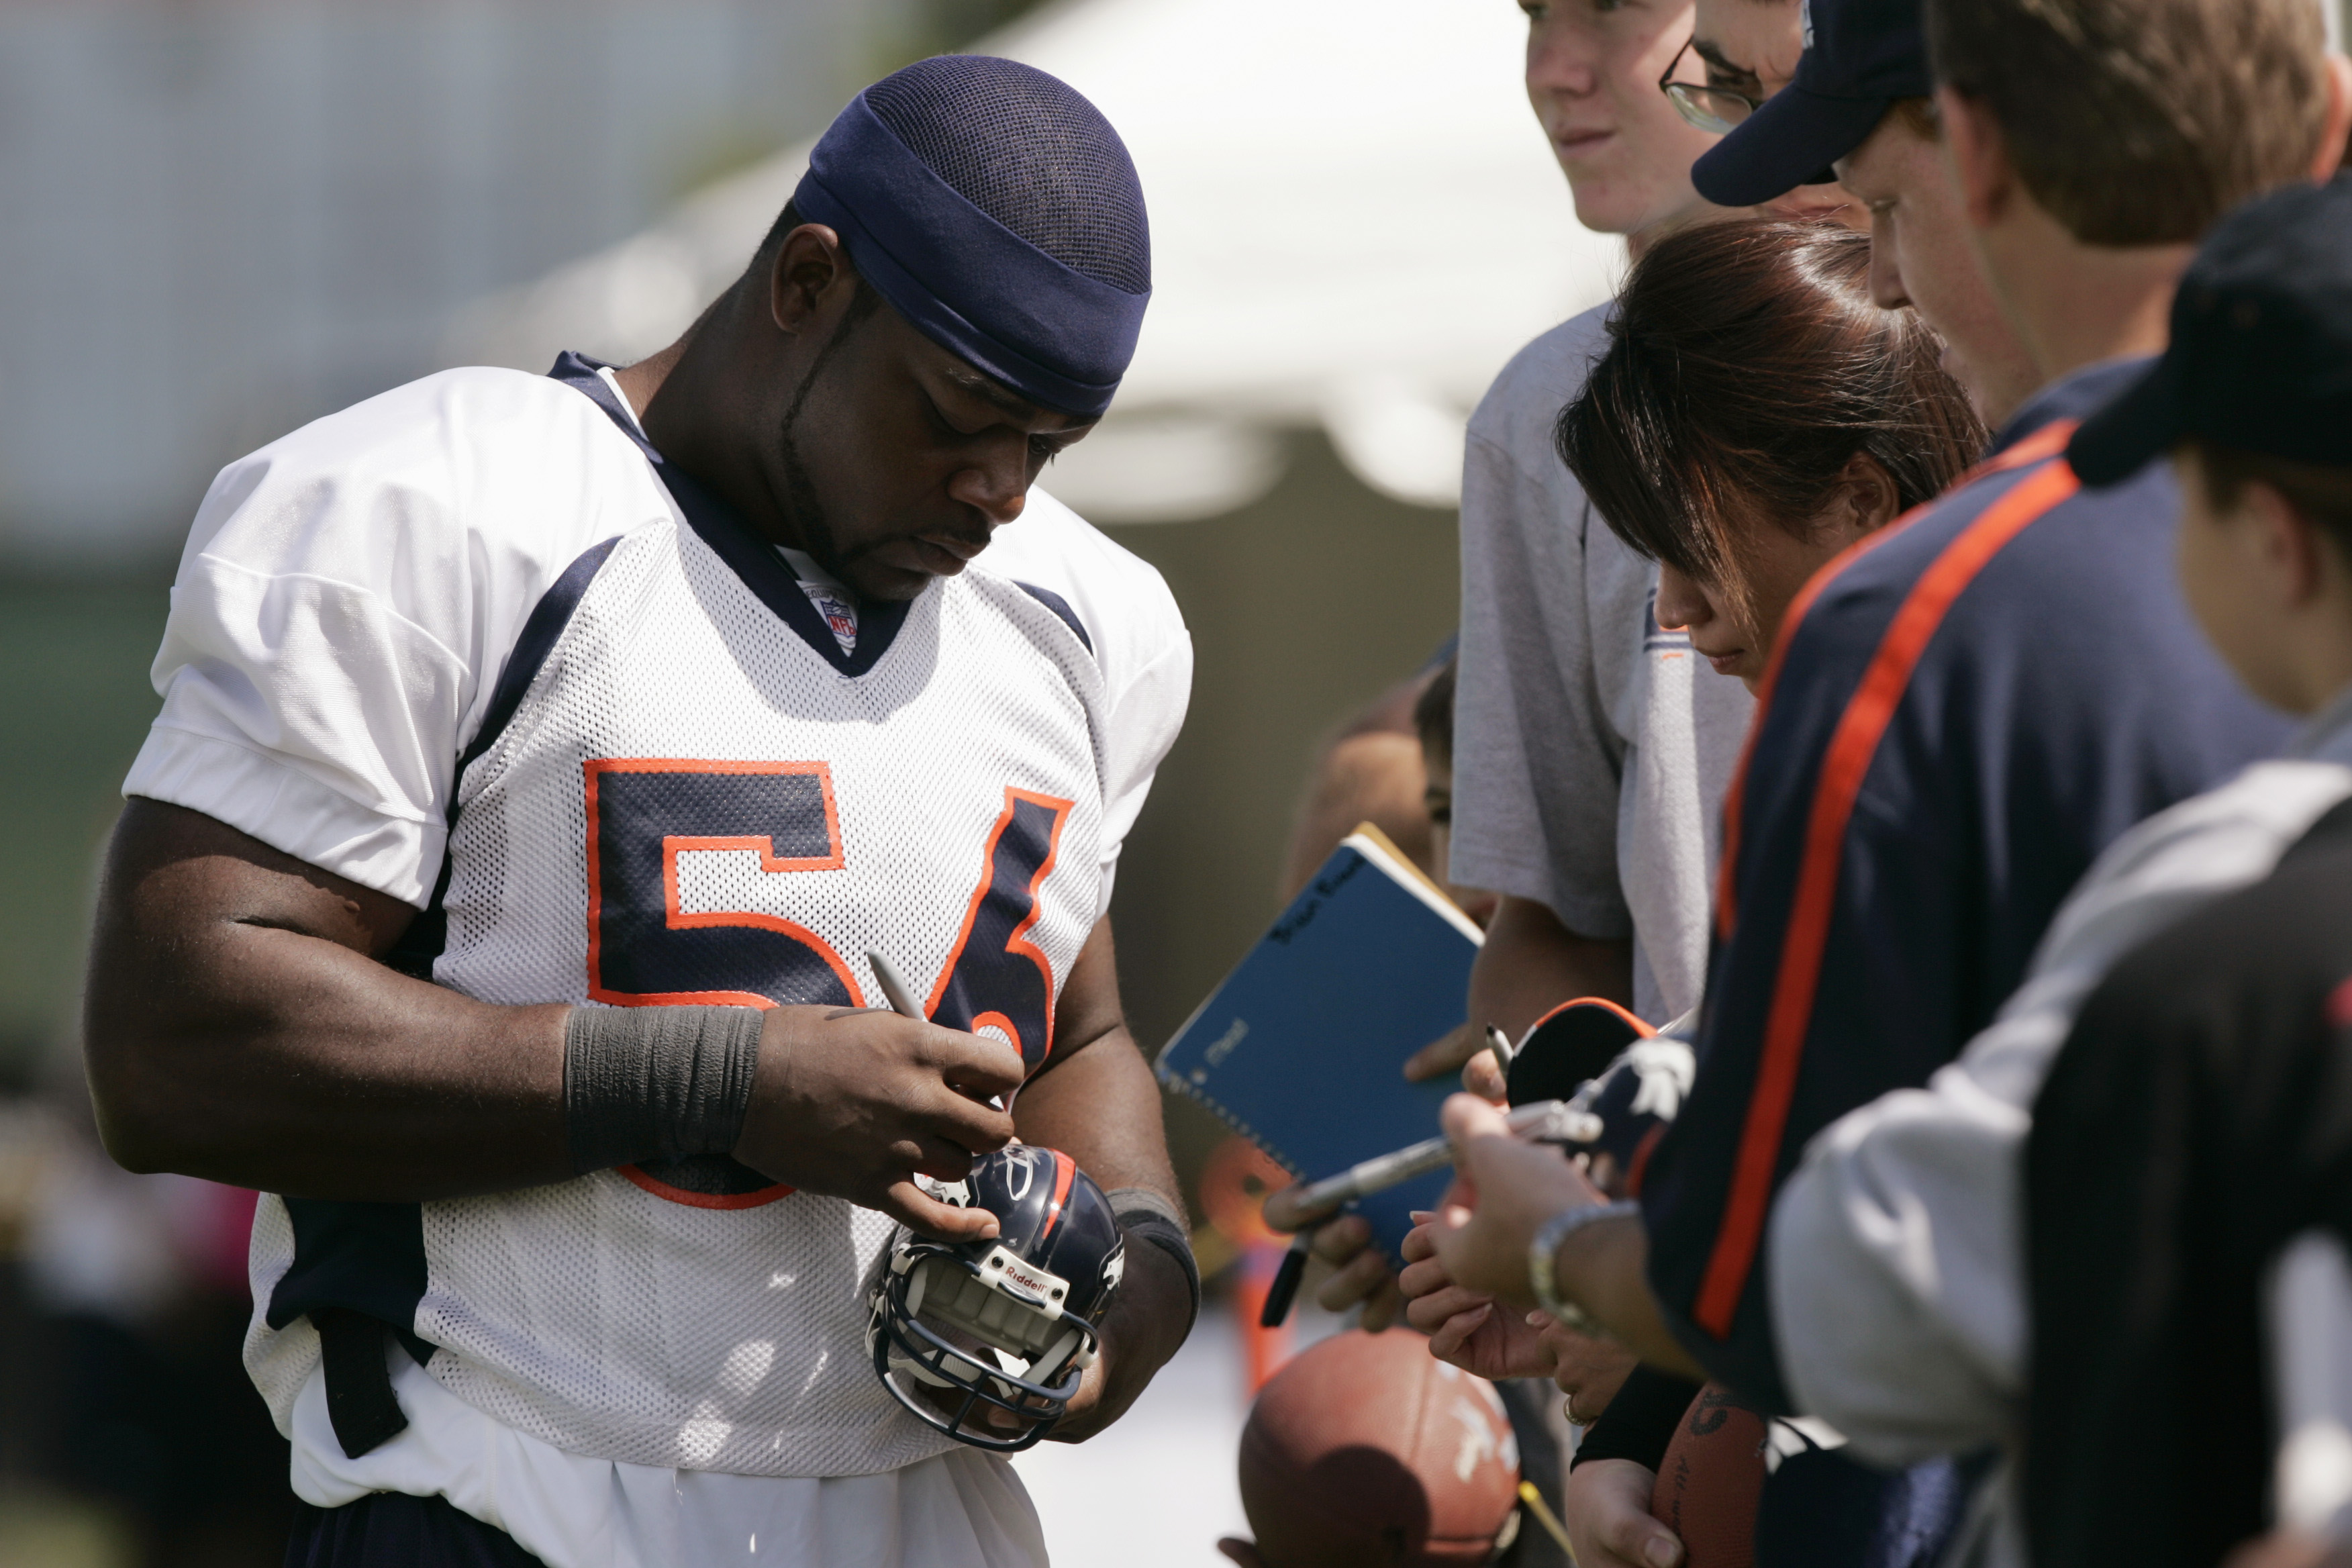 Linebacker Donnie Spragan of the Denver Broncos signs autographs for fans during training camp on July 28, 2004. (credit: Brian Bahr/Getty Images)